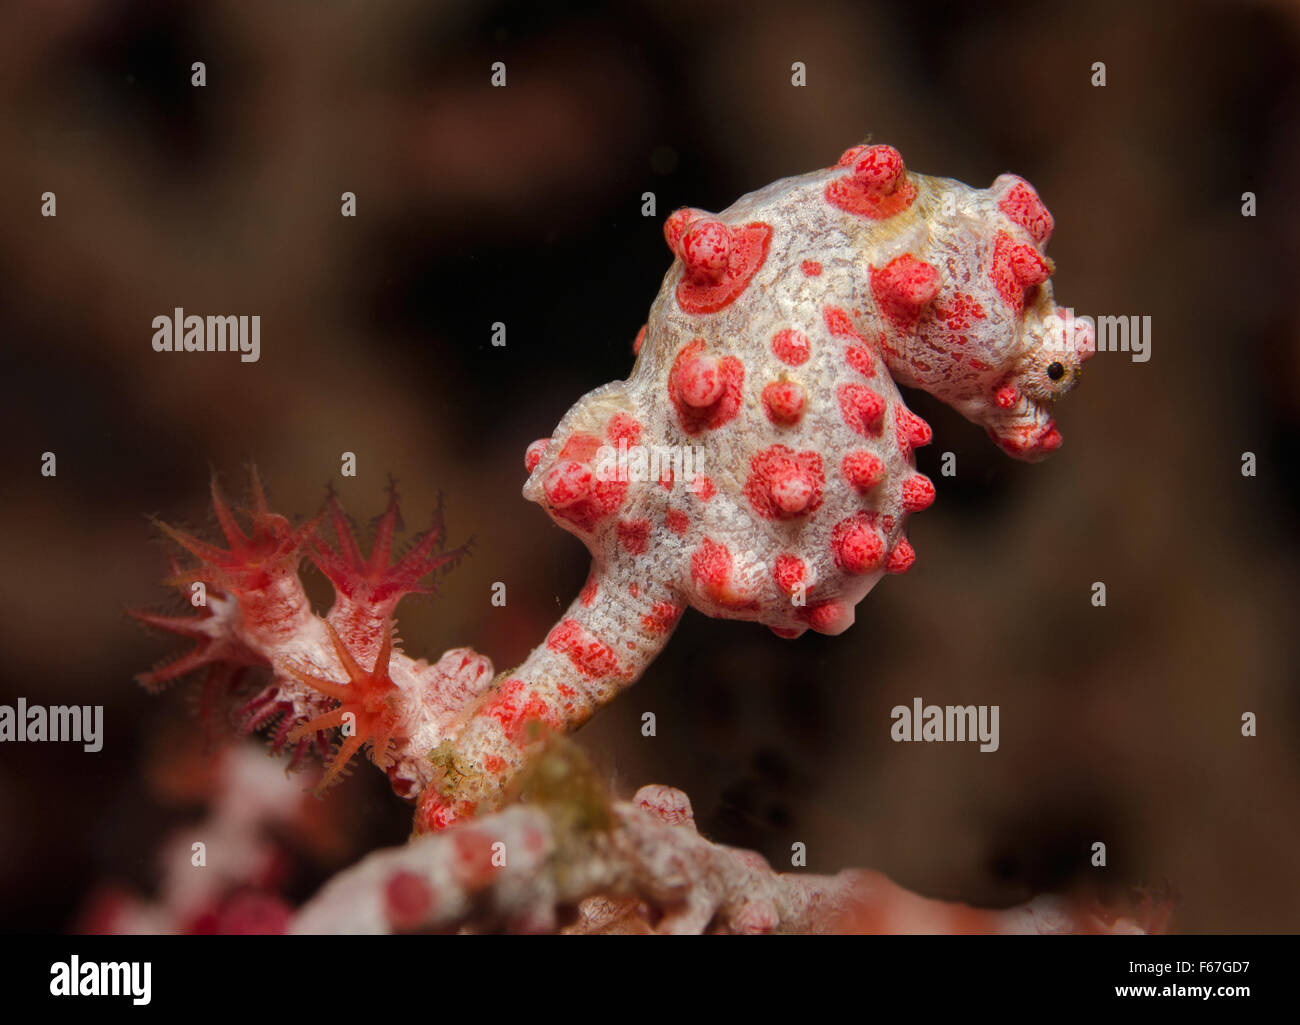 Bargibant's Pygmy Seahorse (Hippocampus bargibanti) attached to Gorgonian fan Coral. Bali, Indonesia. Stock Photo